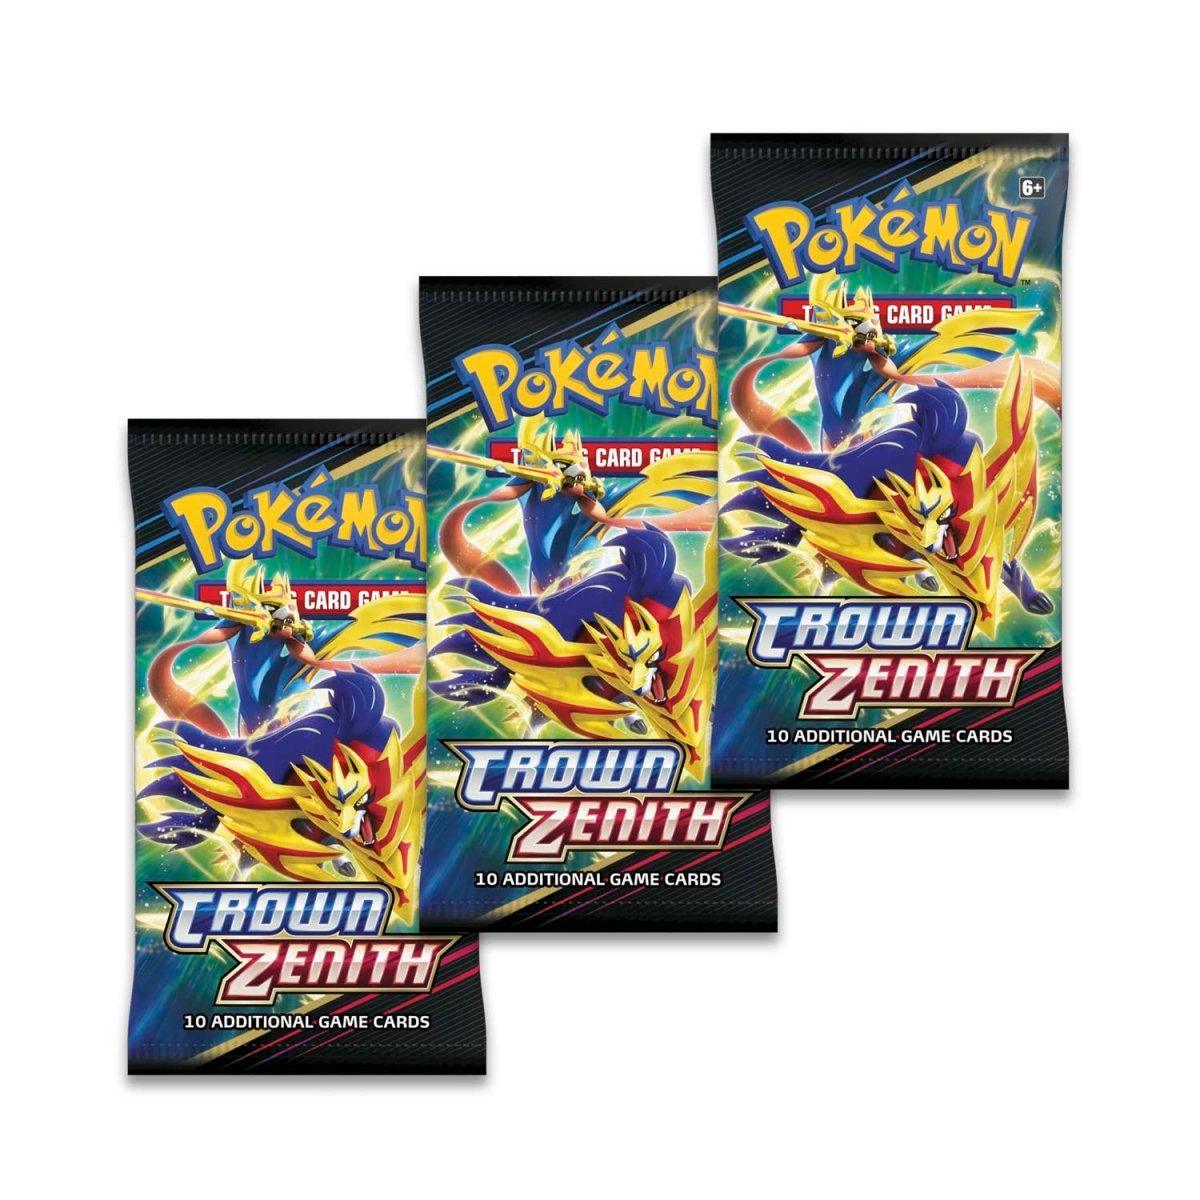 Pokemon Triple Booster Pack - Crown Zenith - 3 Booster Packs & Cinderace Promo Card & Pin - Hobby Champion Inc